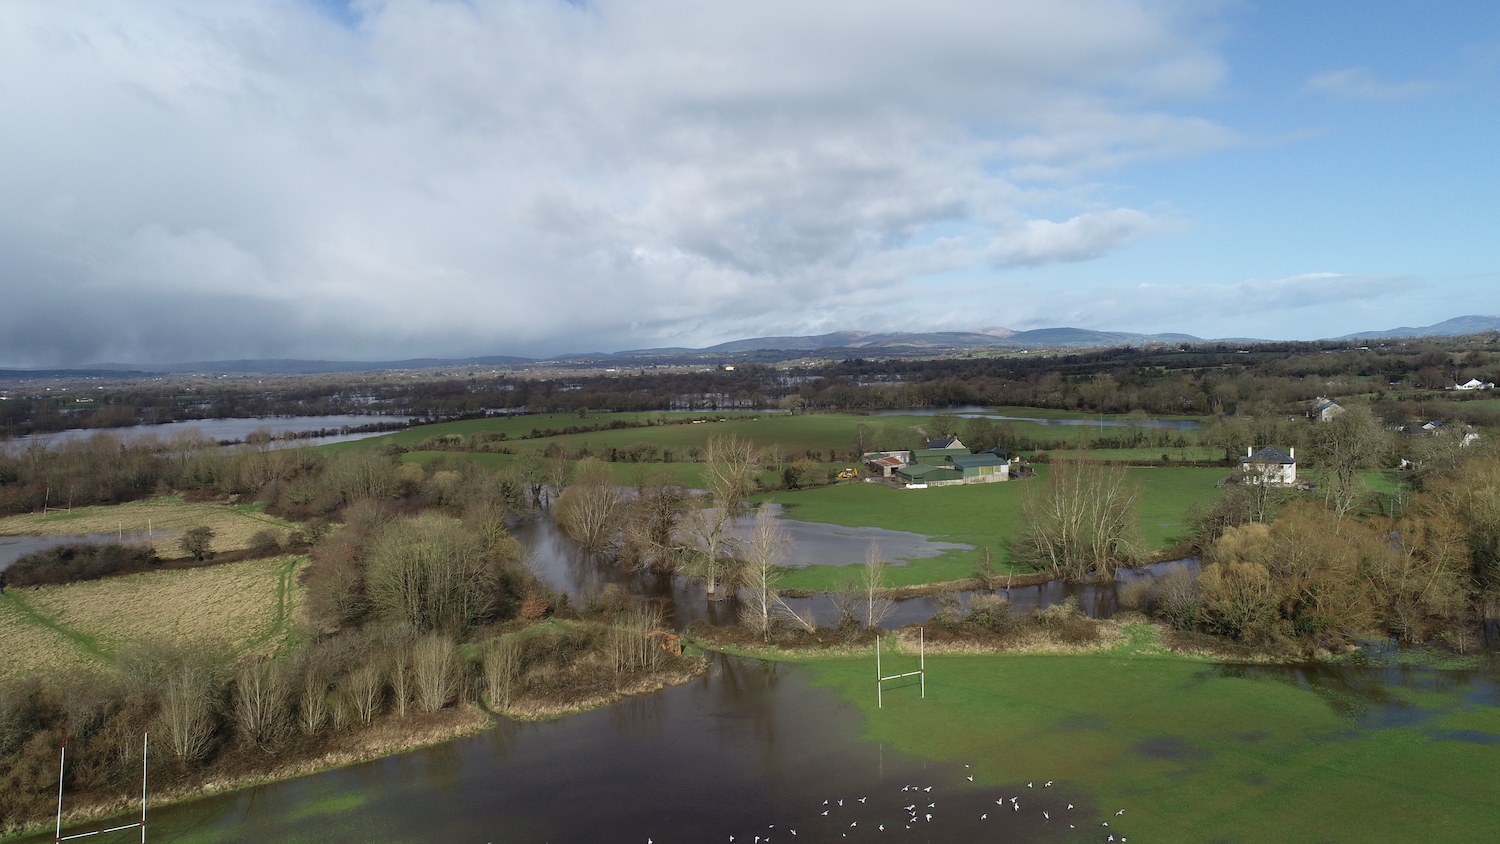 Limerick Flood Relief Scheme Due to current Covid-19 risks, this Initial Public Consultation event will primarily take place via an online forum.